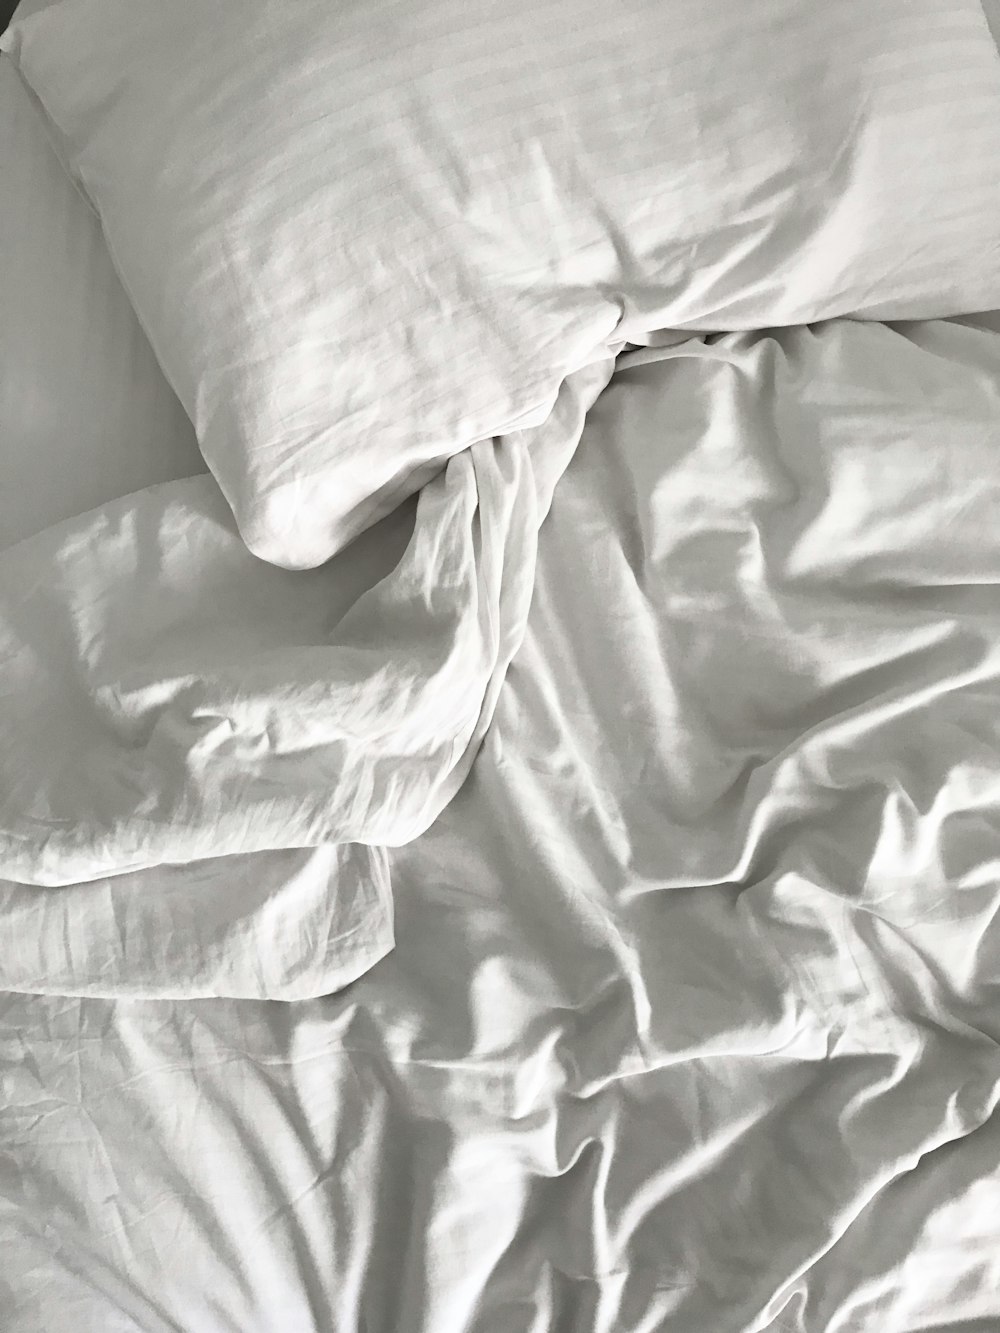 an unmade bed with white sheets and pillows